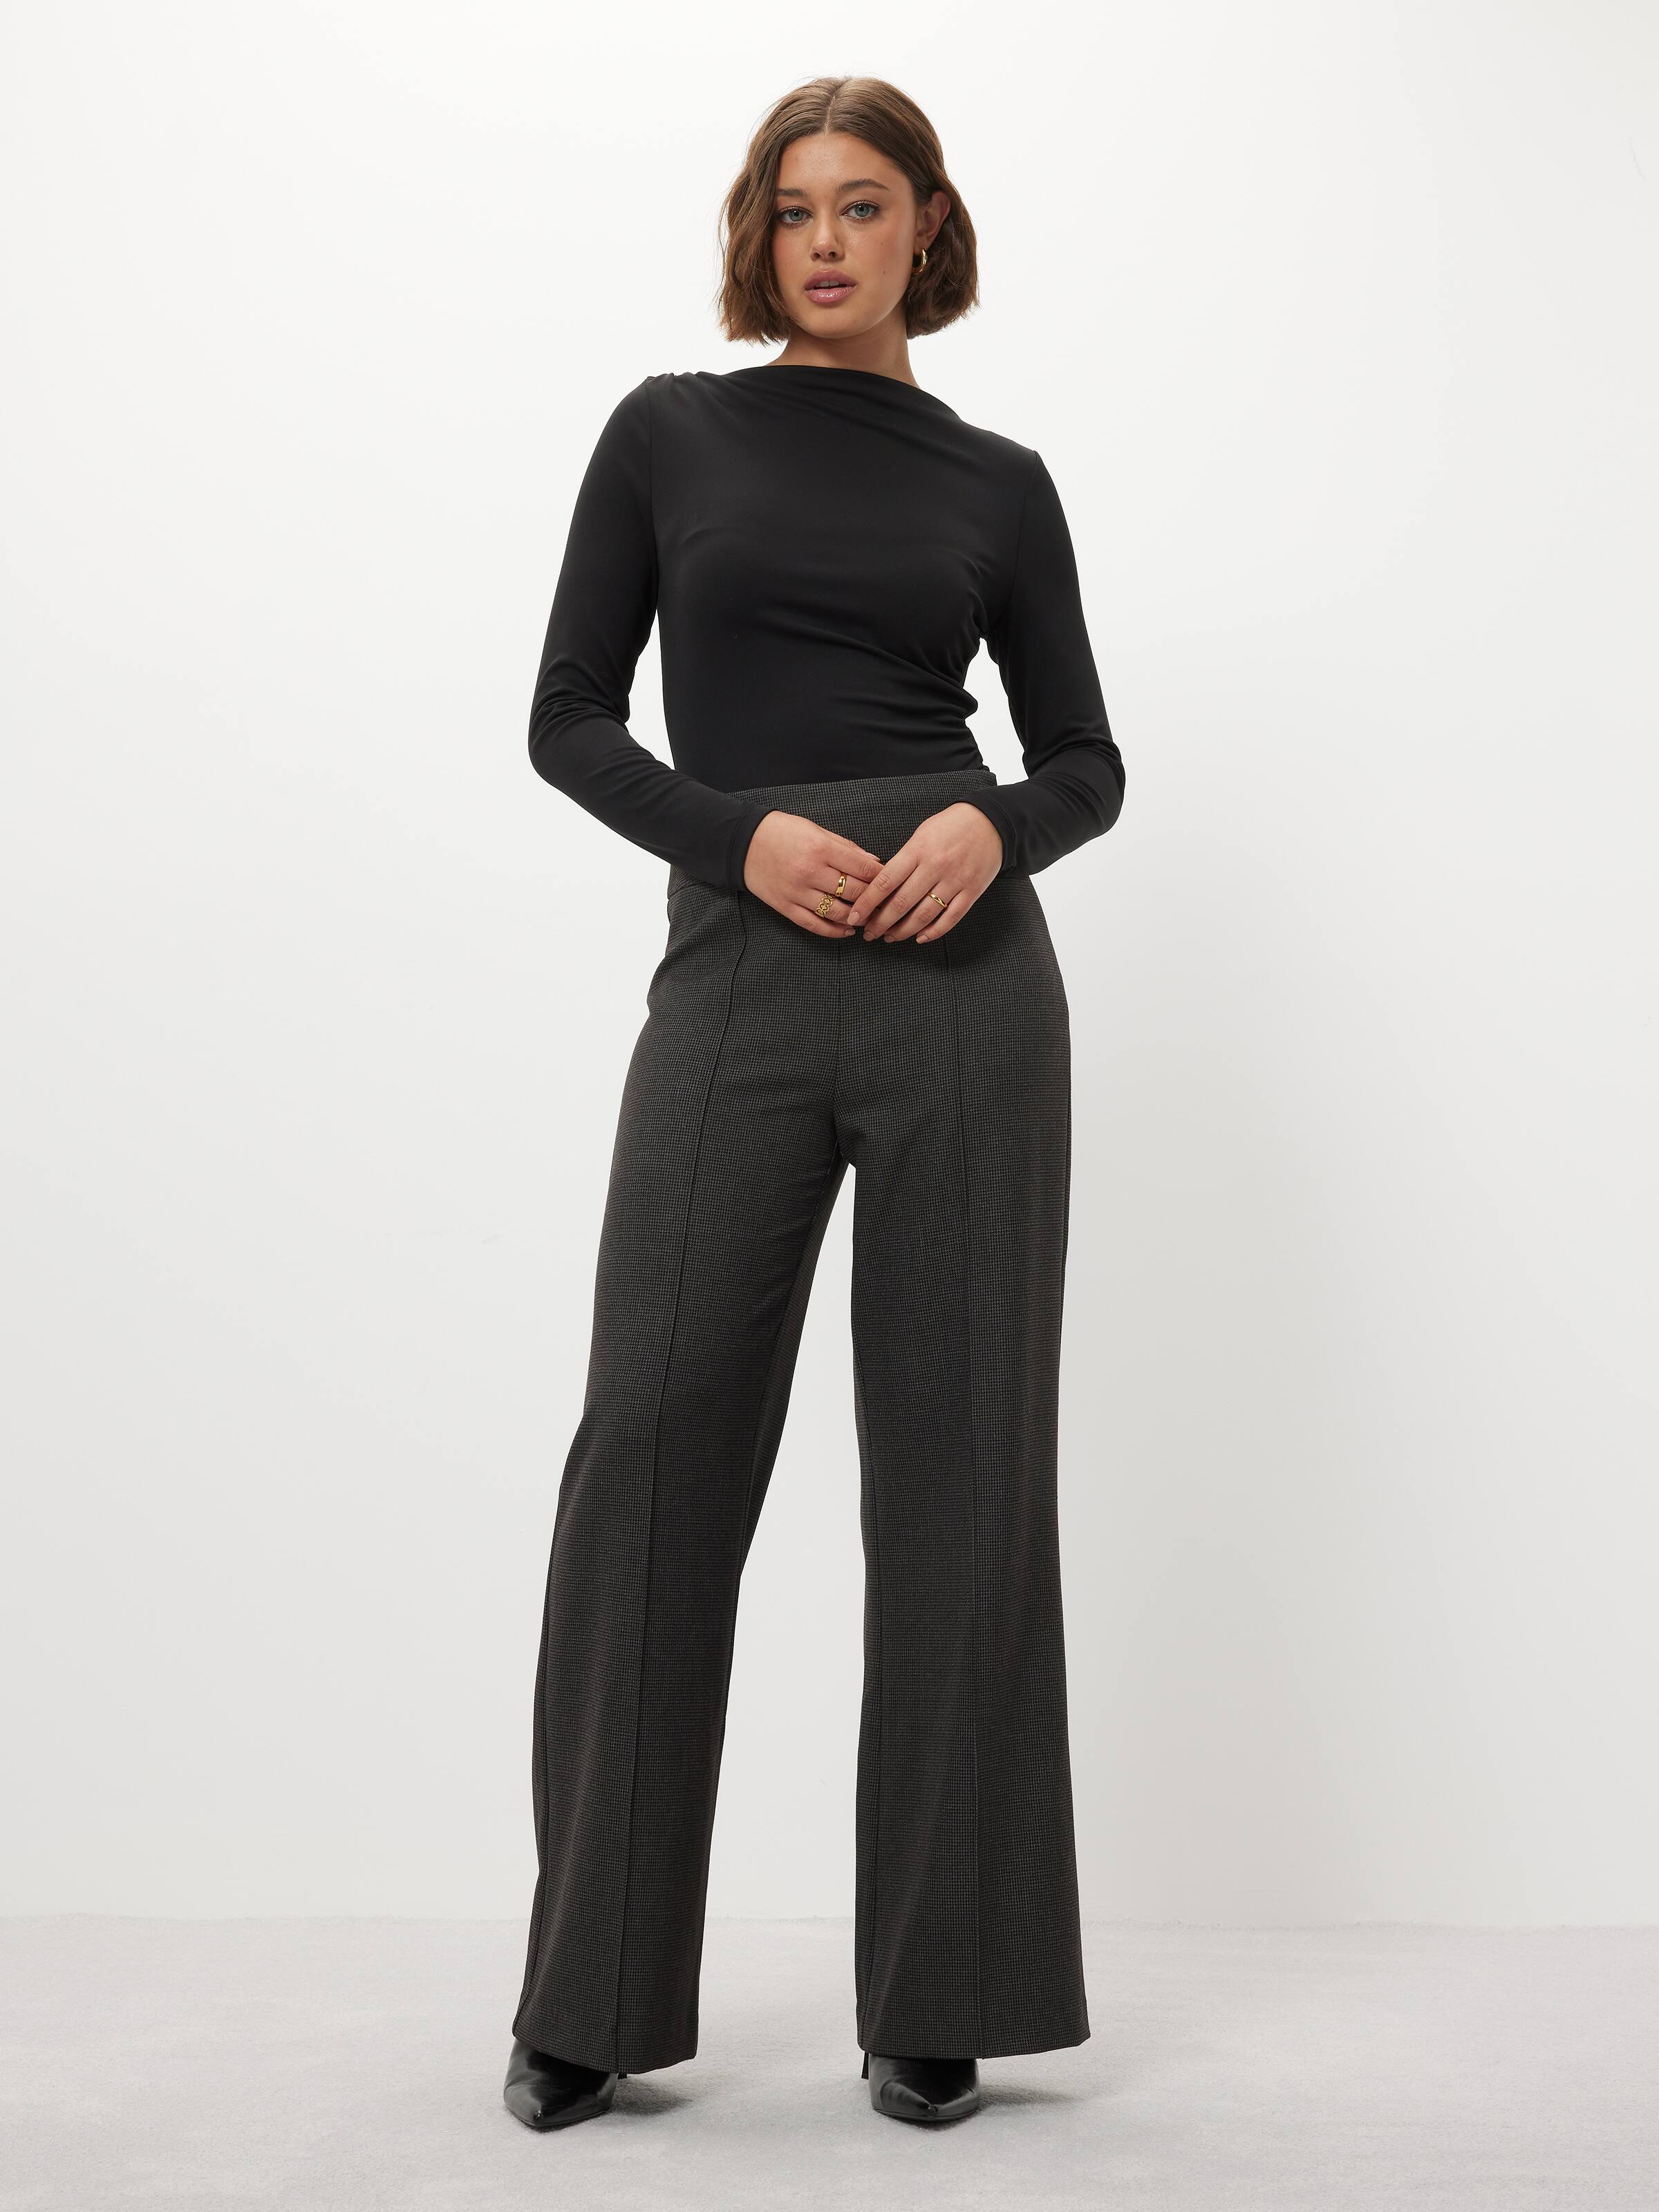 uk size 14 woman pants - Buy uk size 14 woman pants at Best Price in  Malaysia